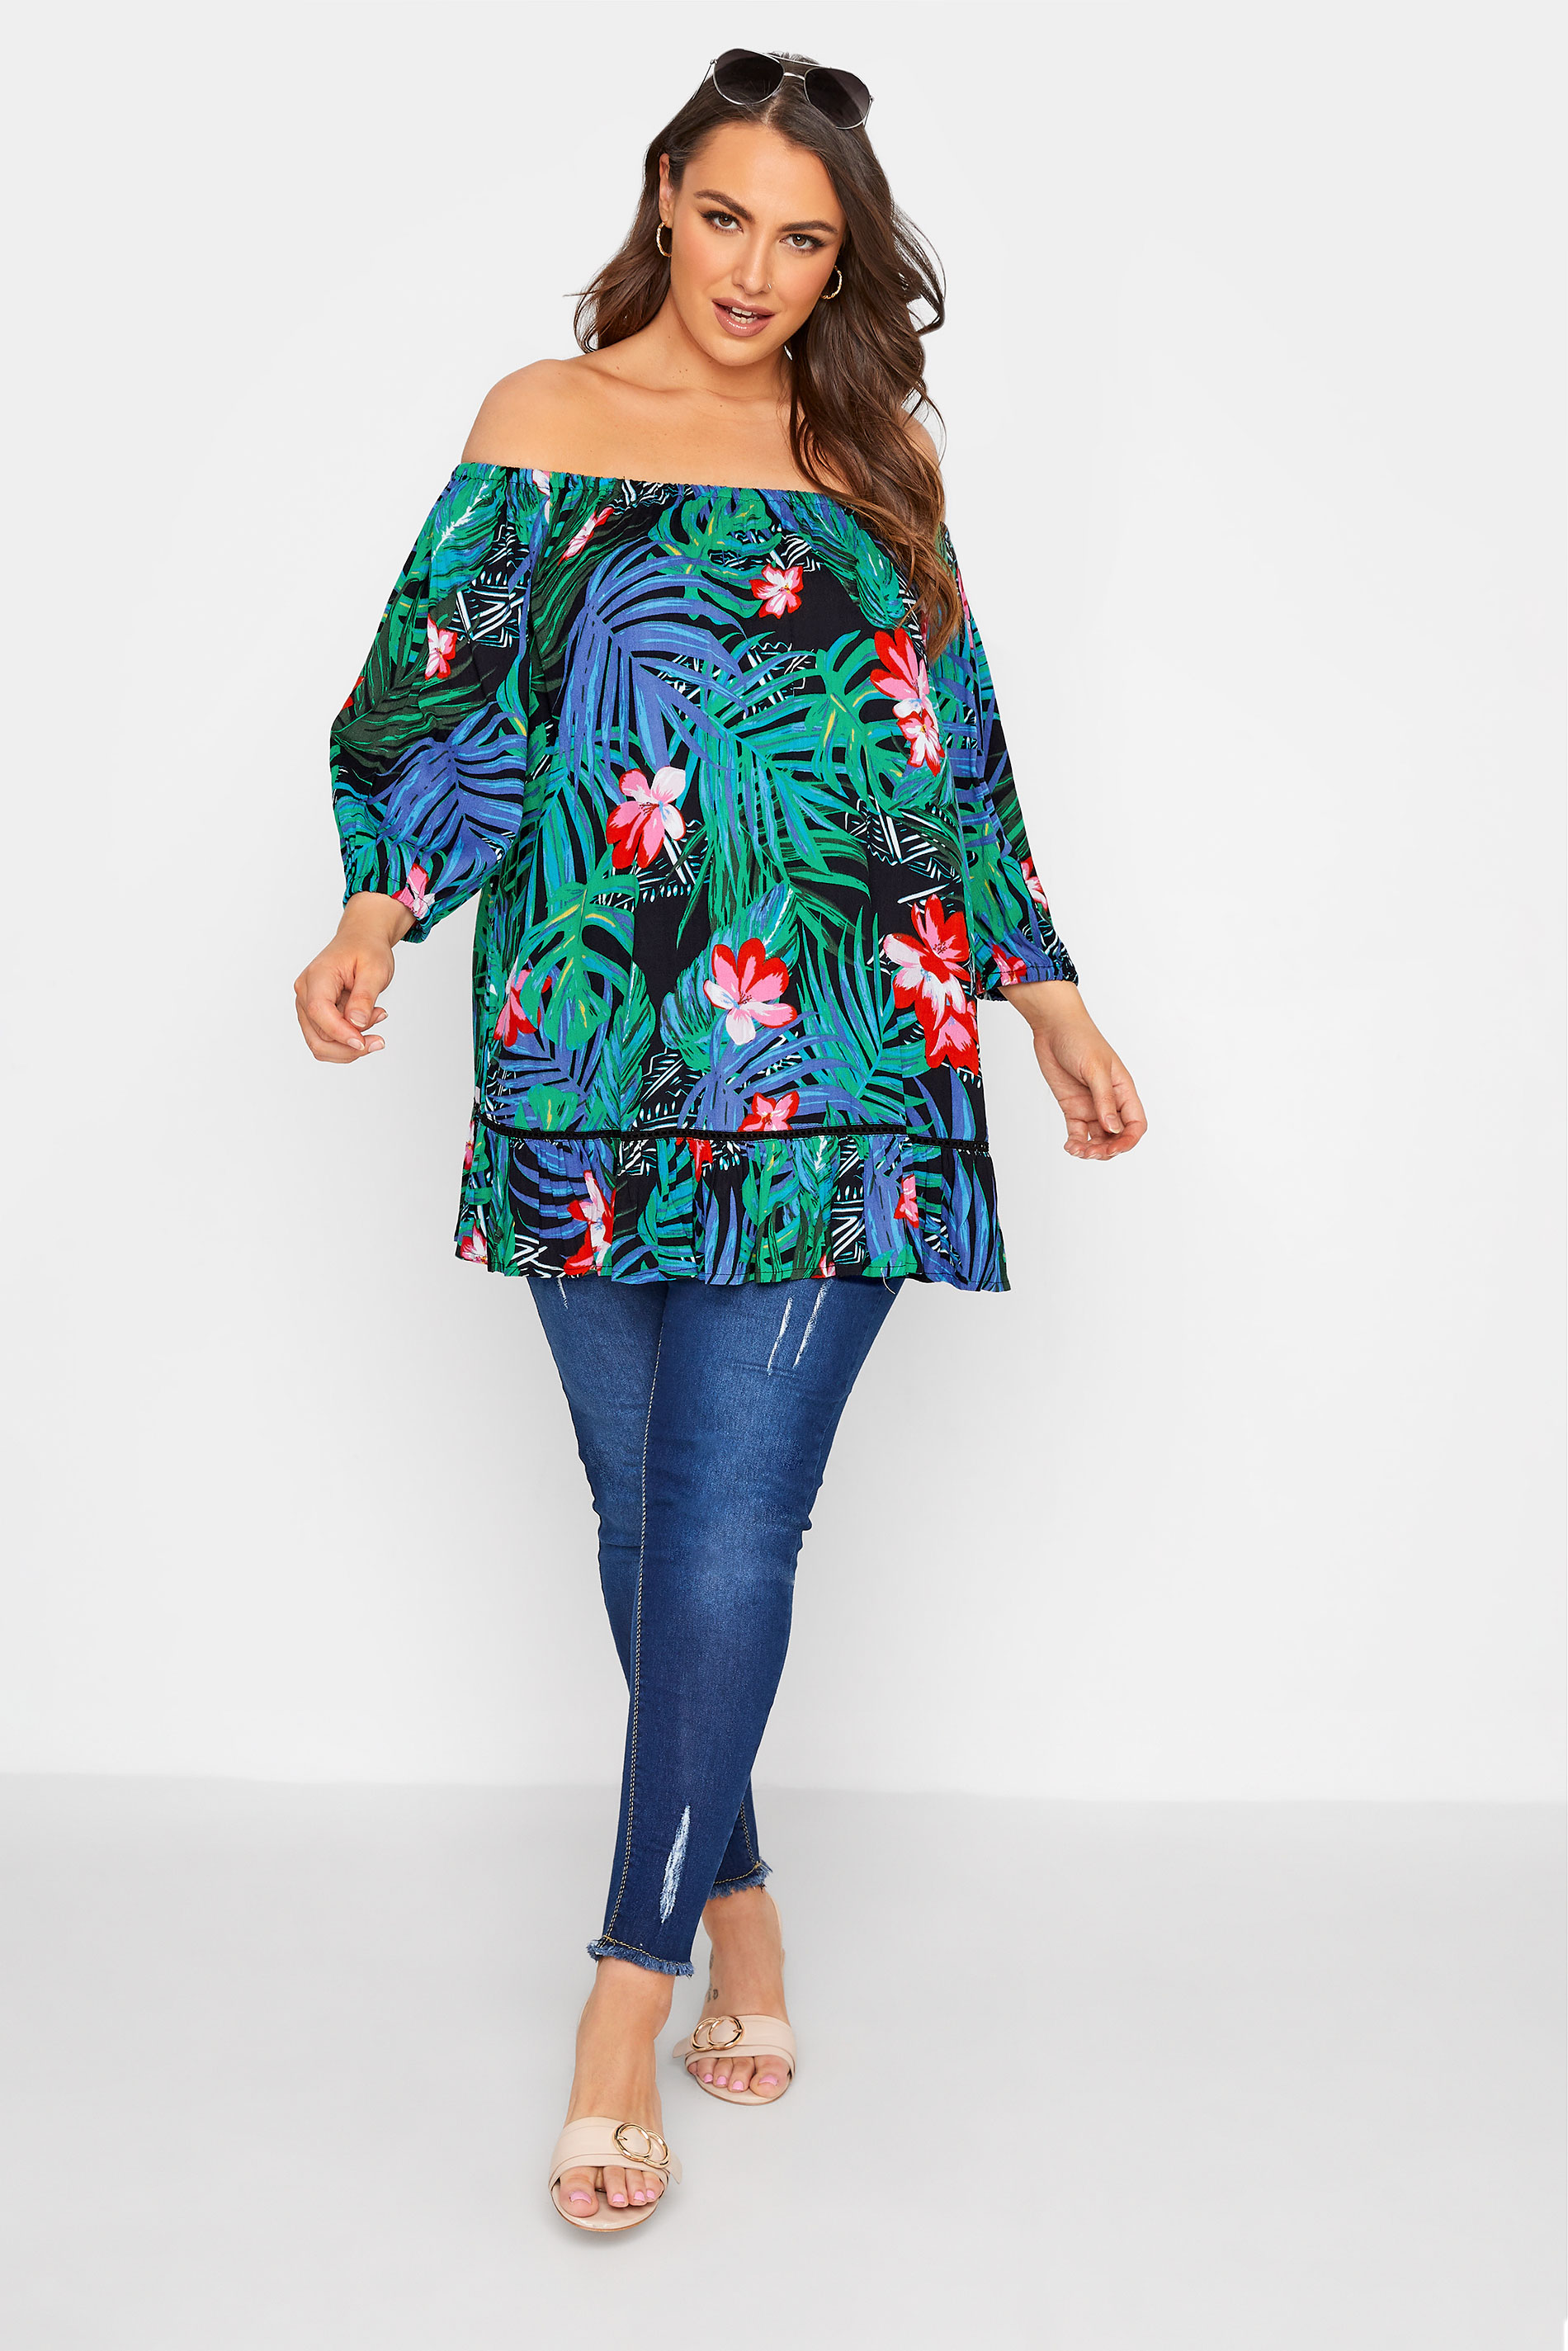 Grande taille  Tops Grande taille  Tops Casual | Top Noir Tropical Style Bardot - RC99156